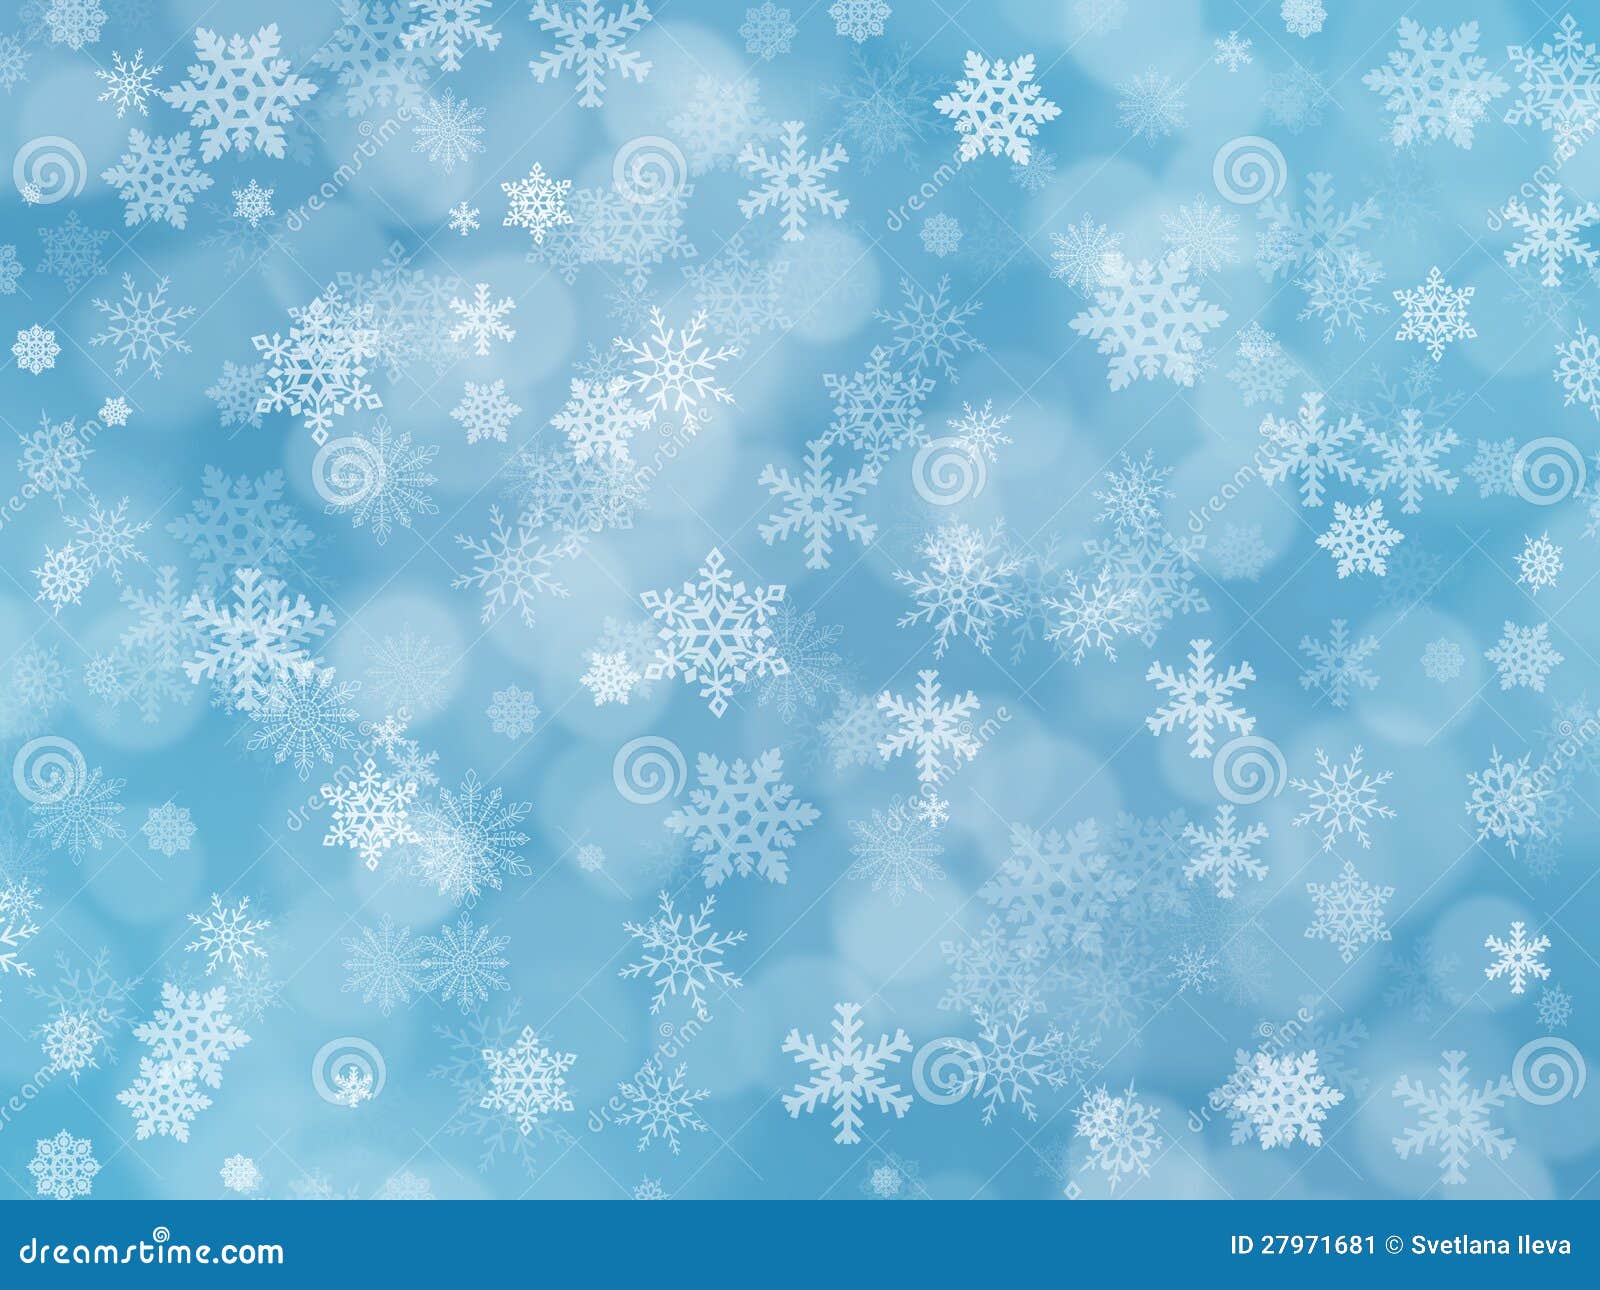 blue winter boke background with snowflakes